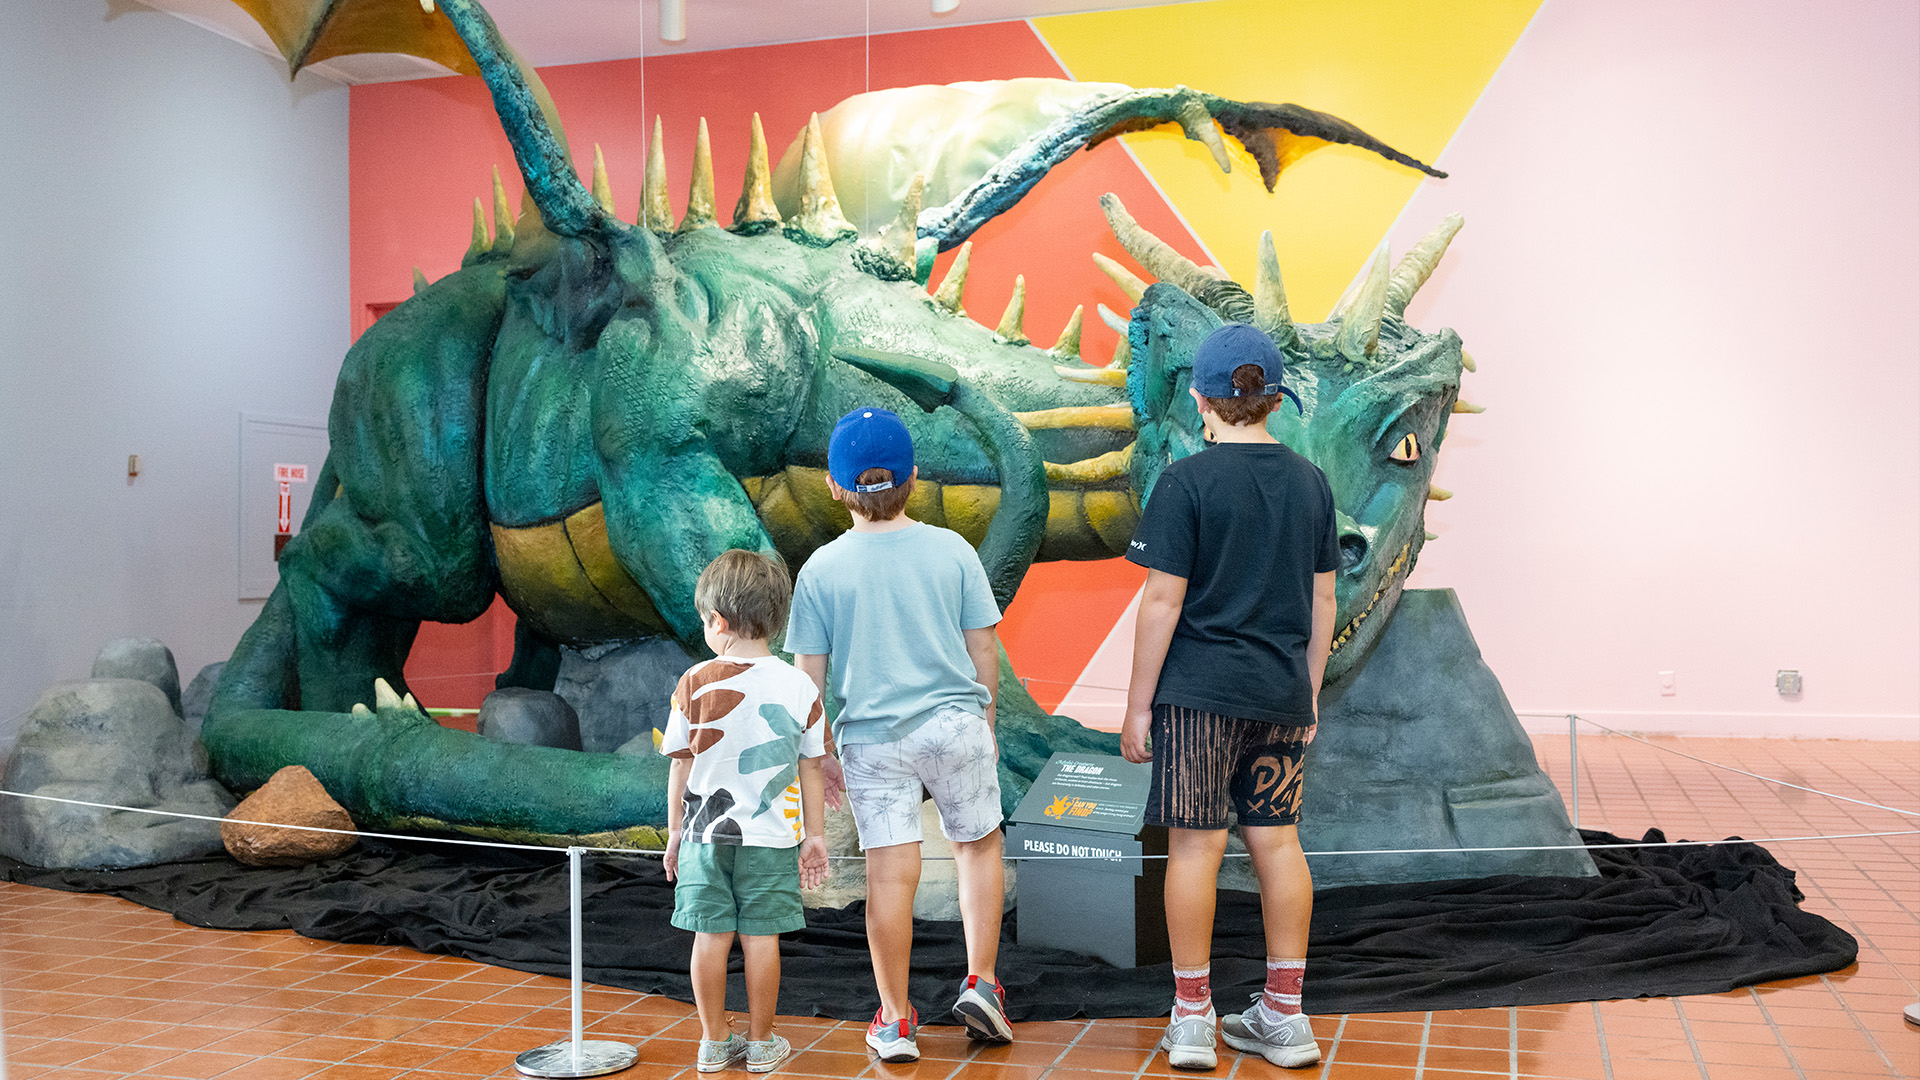 Children standing in front of large green dragon.